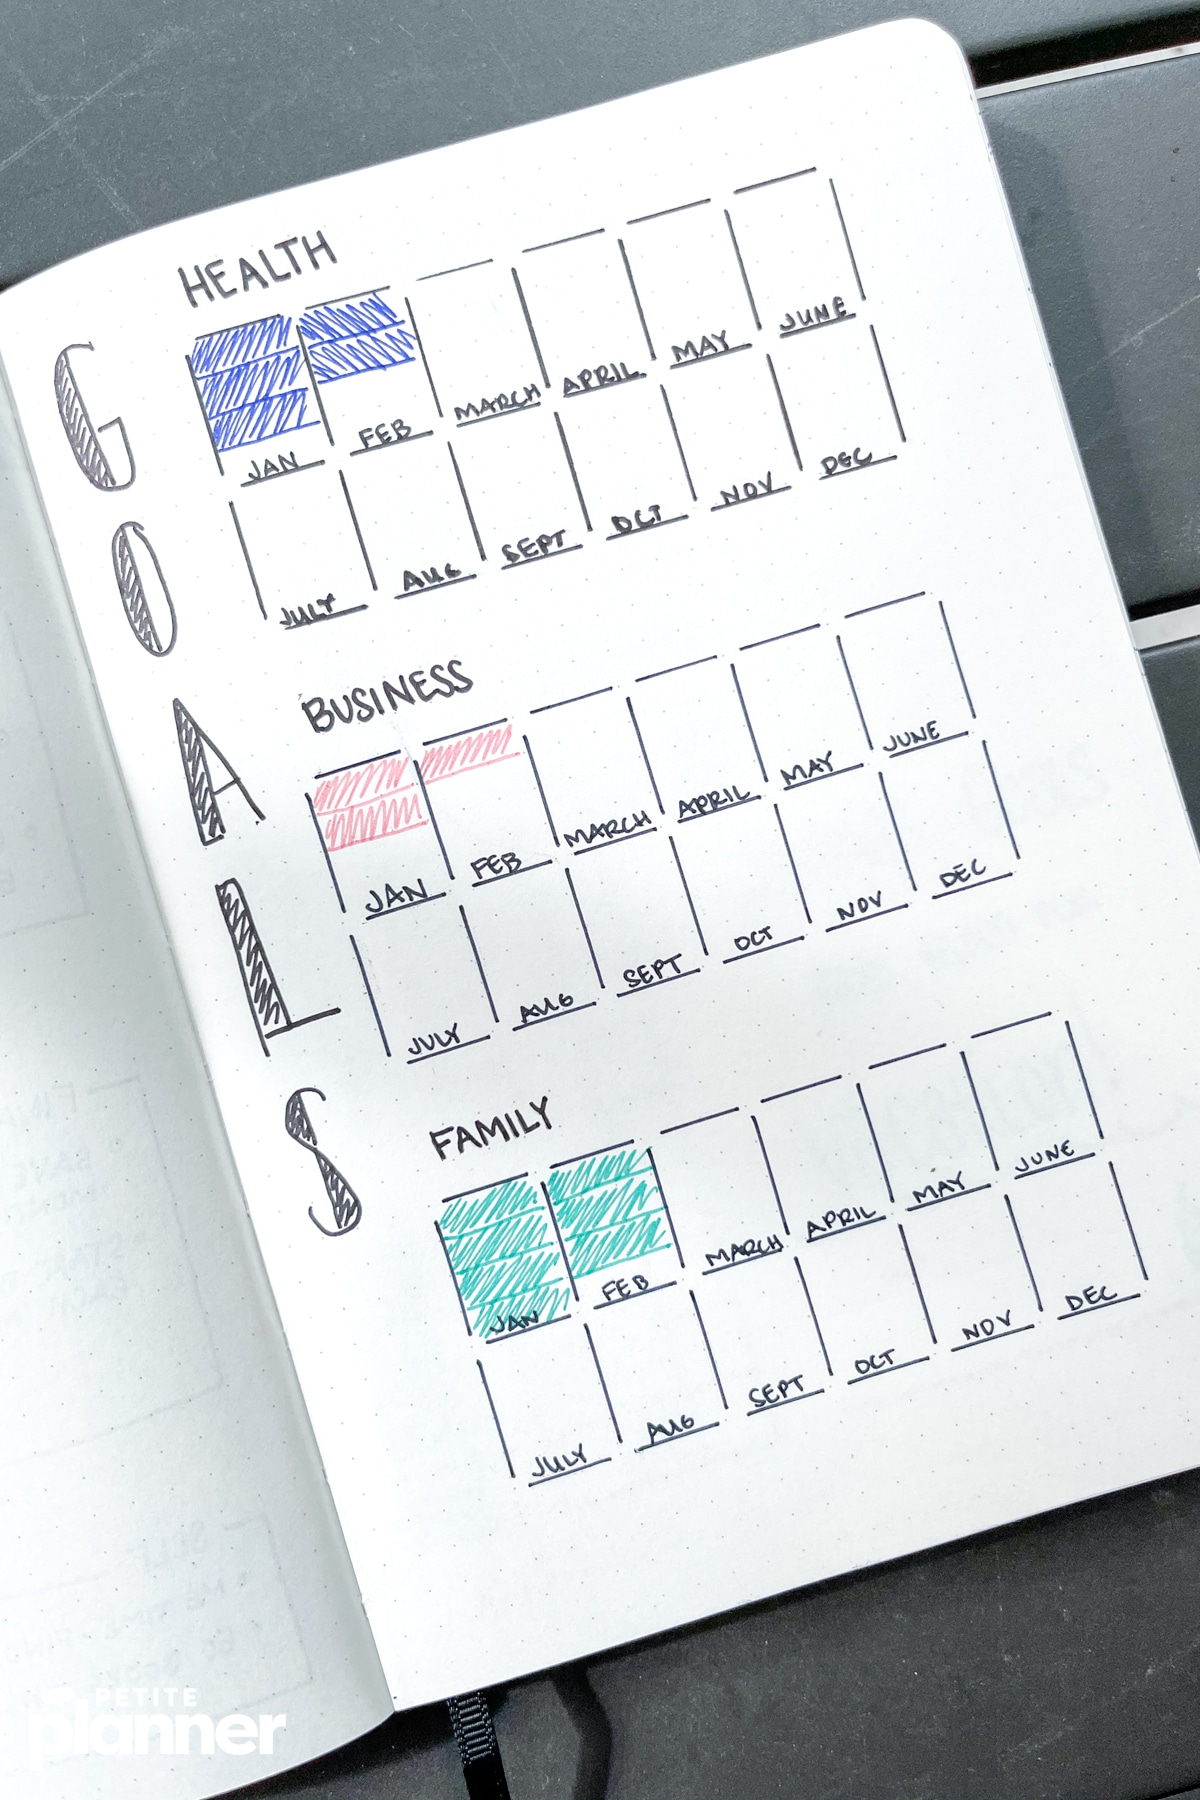 Monthly bullet journal goals layout